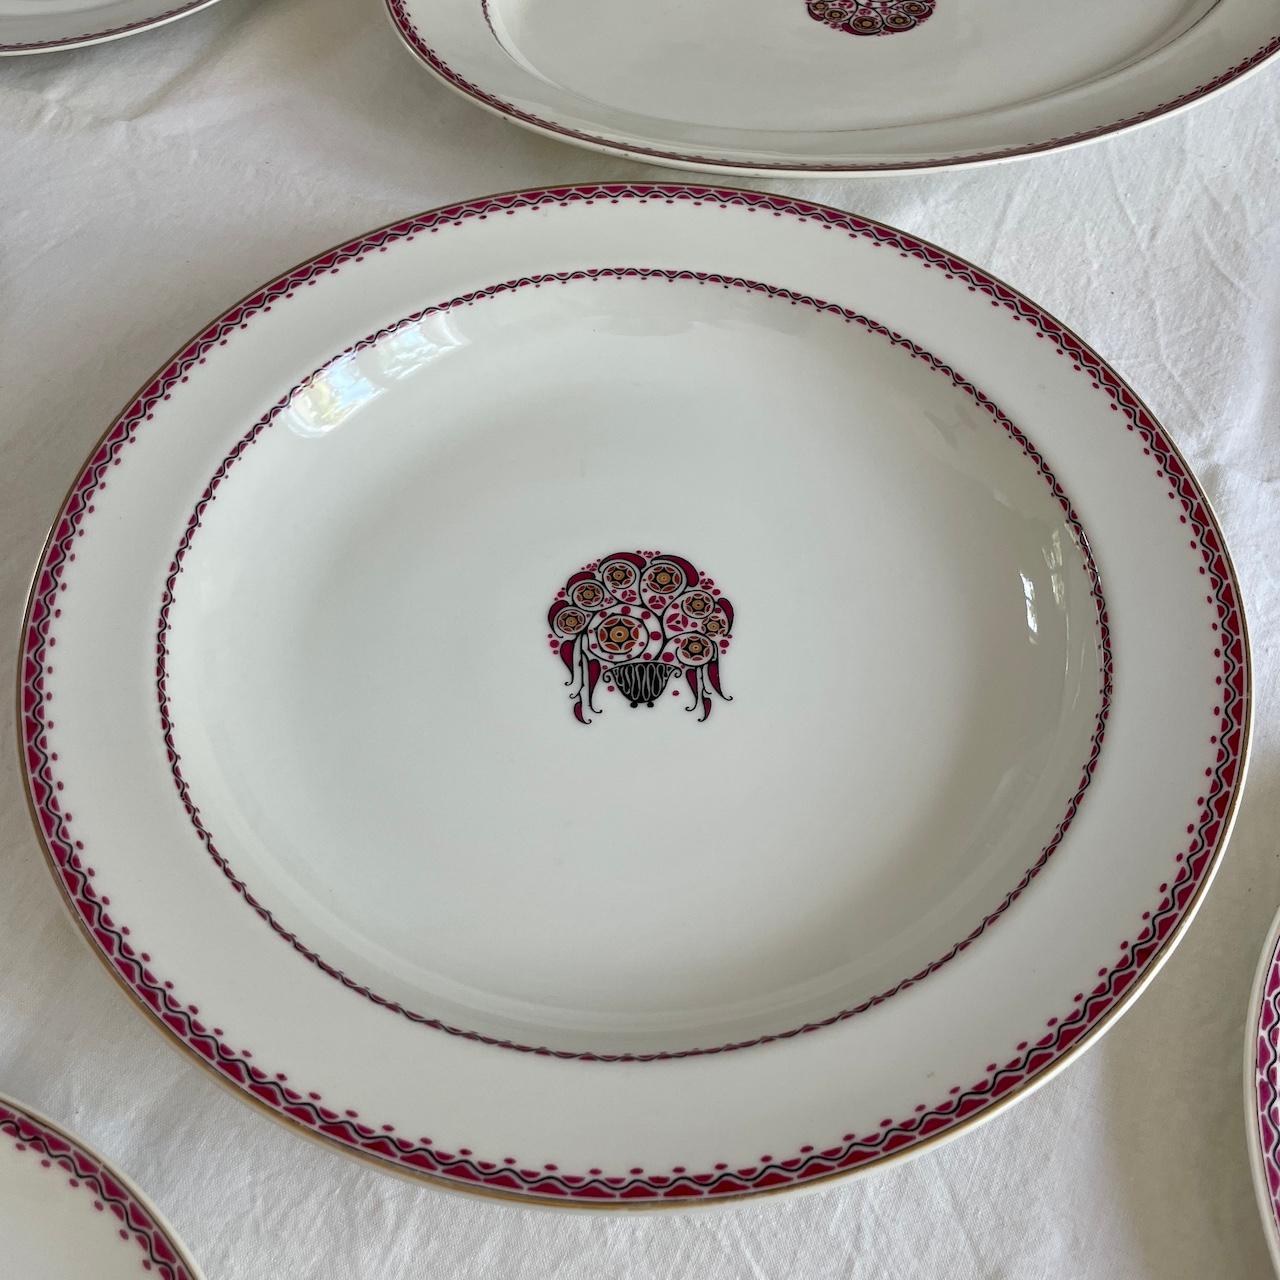 French Art Deco Dinner Service by Haviland Limoges, Circa 1925